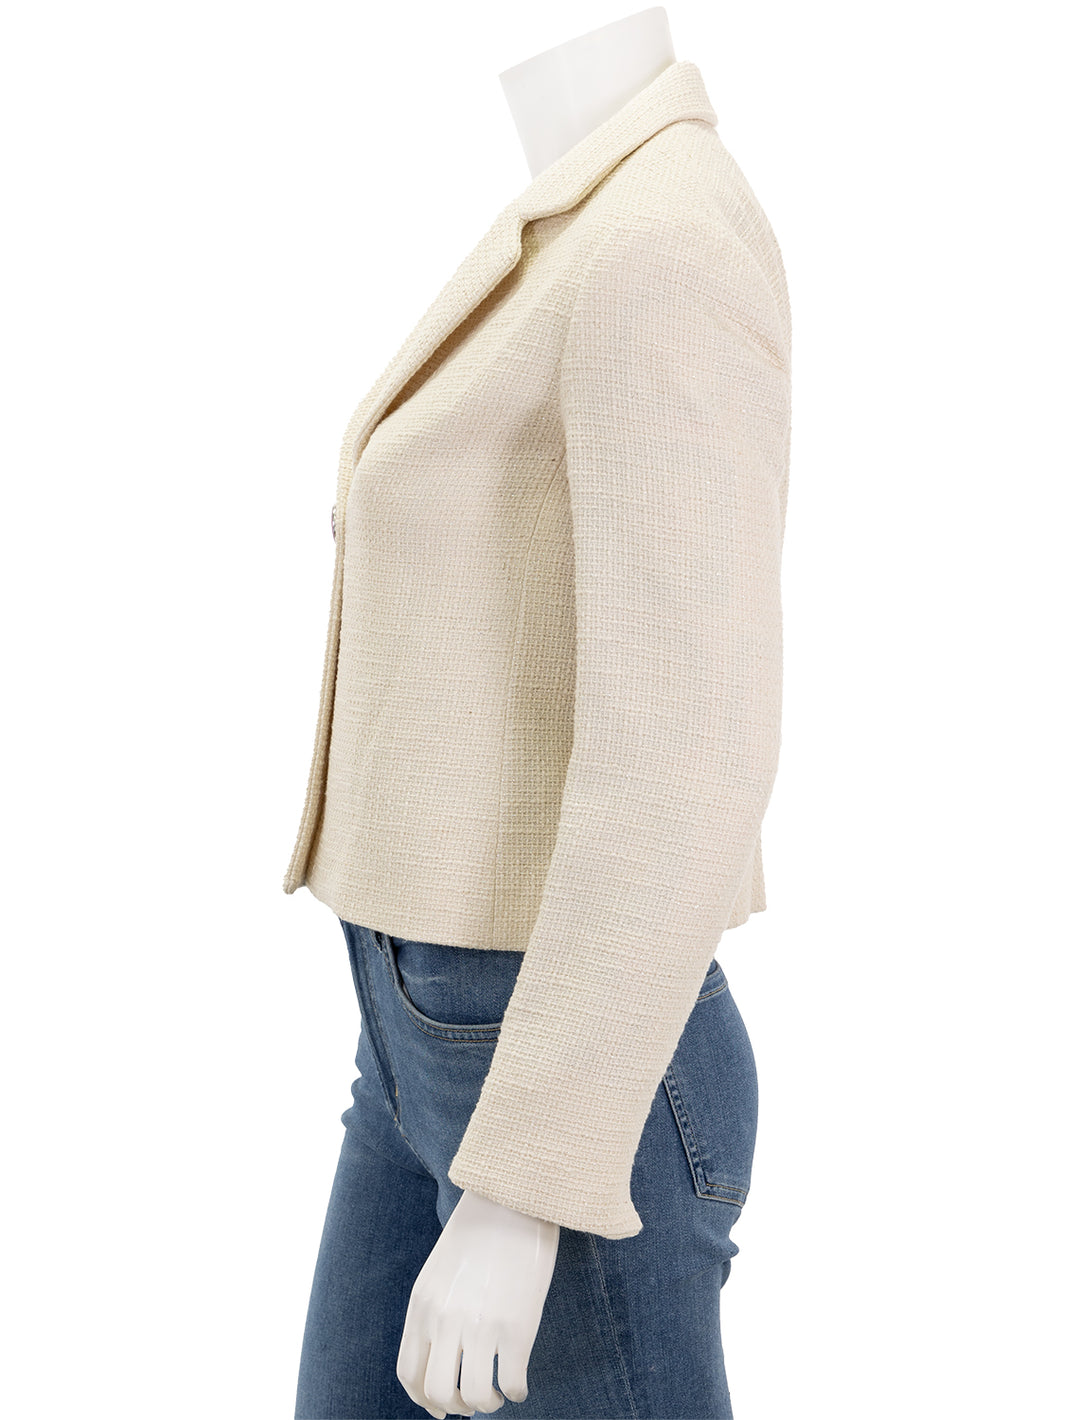 Side view of Vilagallo's imma jacket in ivory.